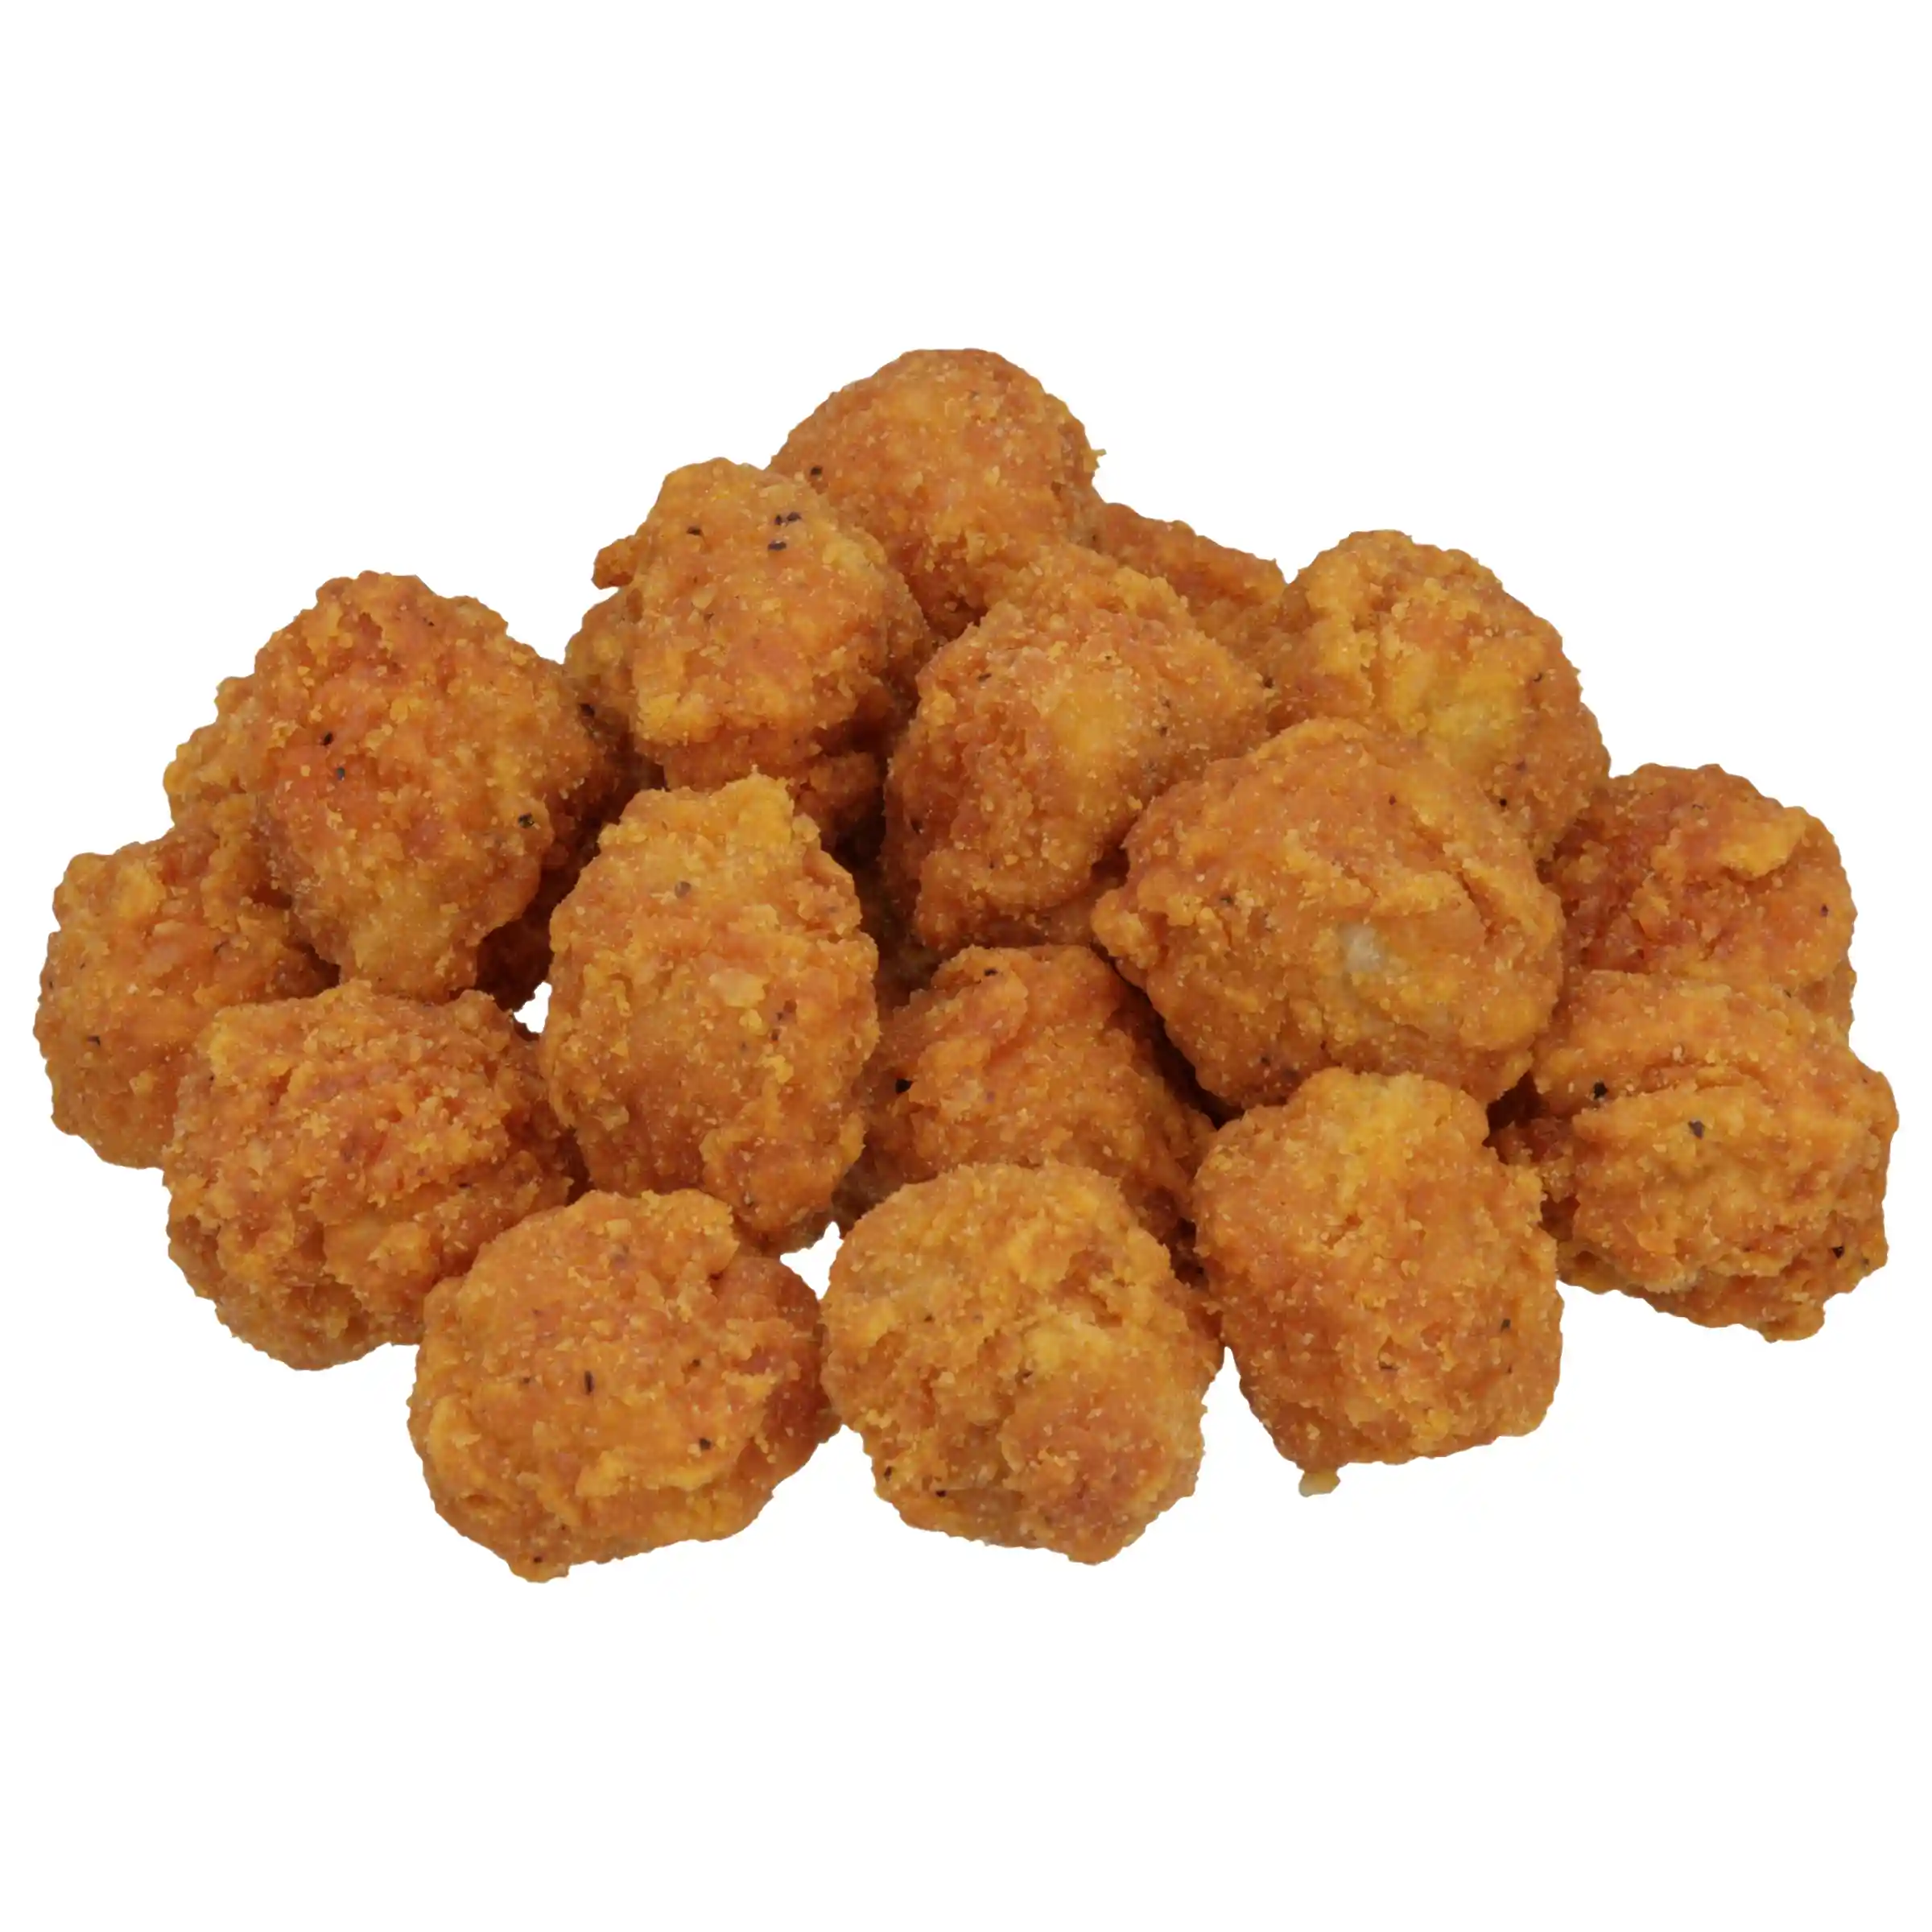 Tyson® Fully Cooked Whole Grain Breaded Hot & Spicy Popcorn Chicken Bites® Chicken Chunks CN, 0.275 oz. _image_11